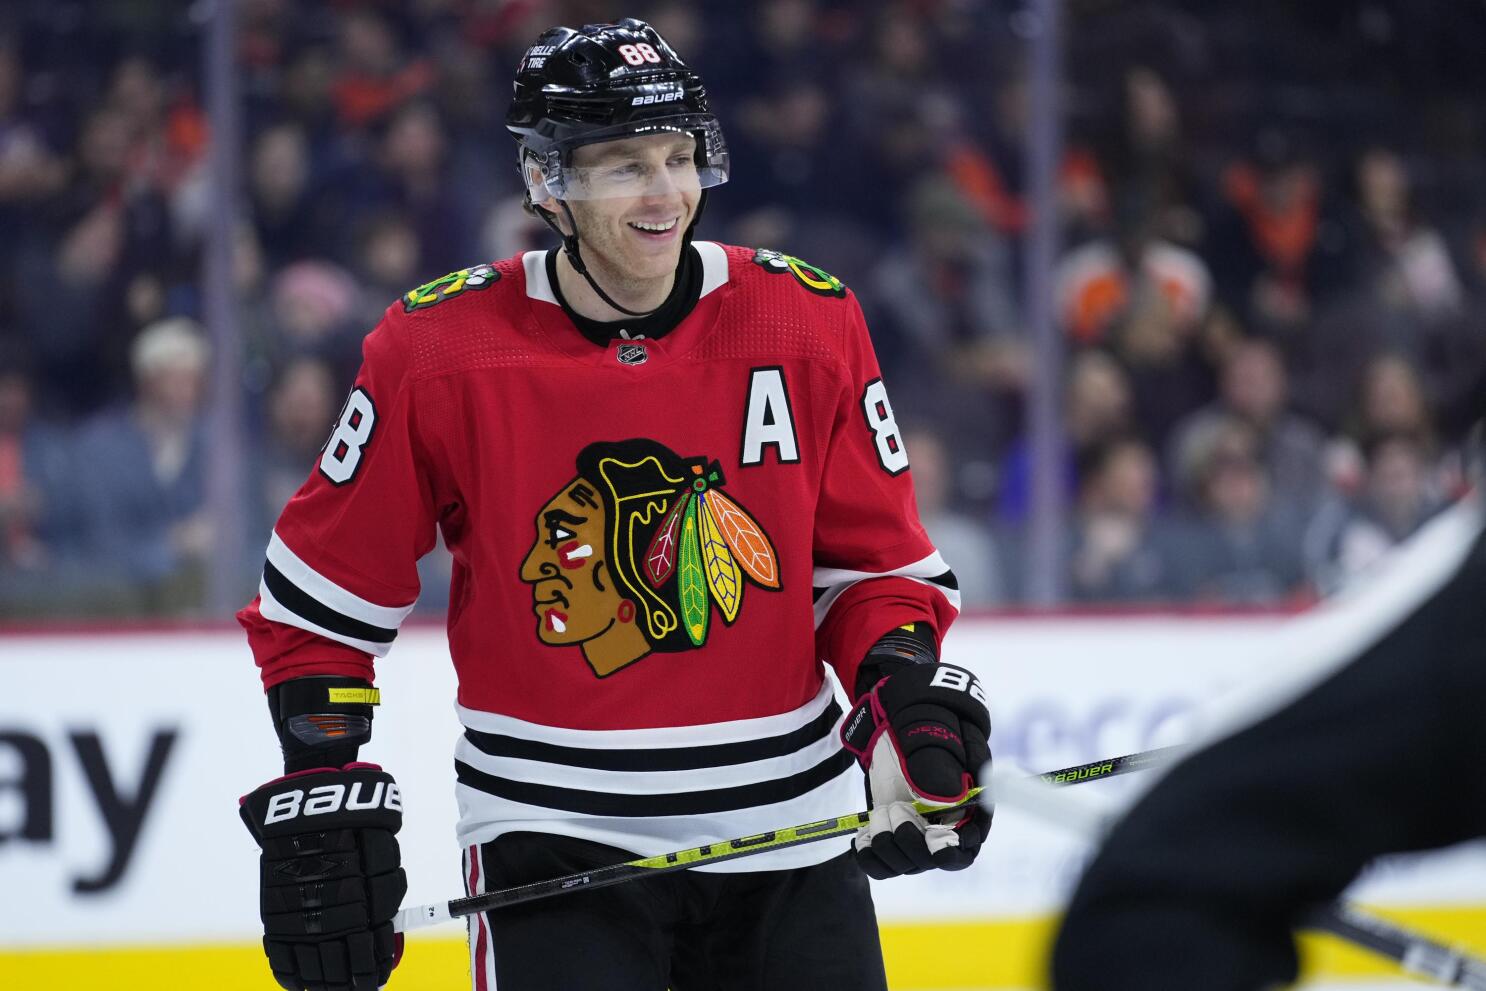 Patrick Kane would fit in so well on the New York Rangers